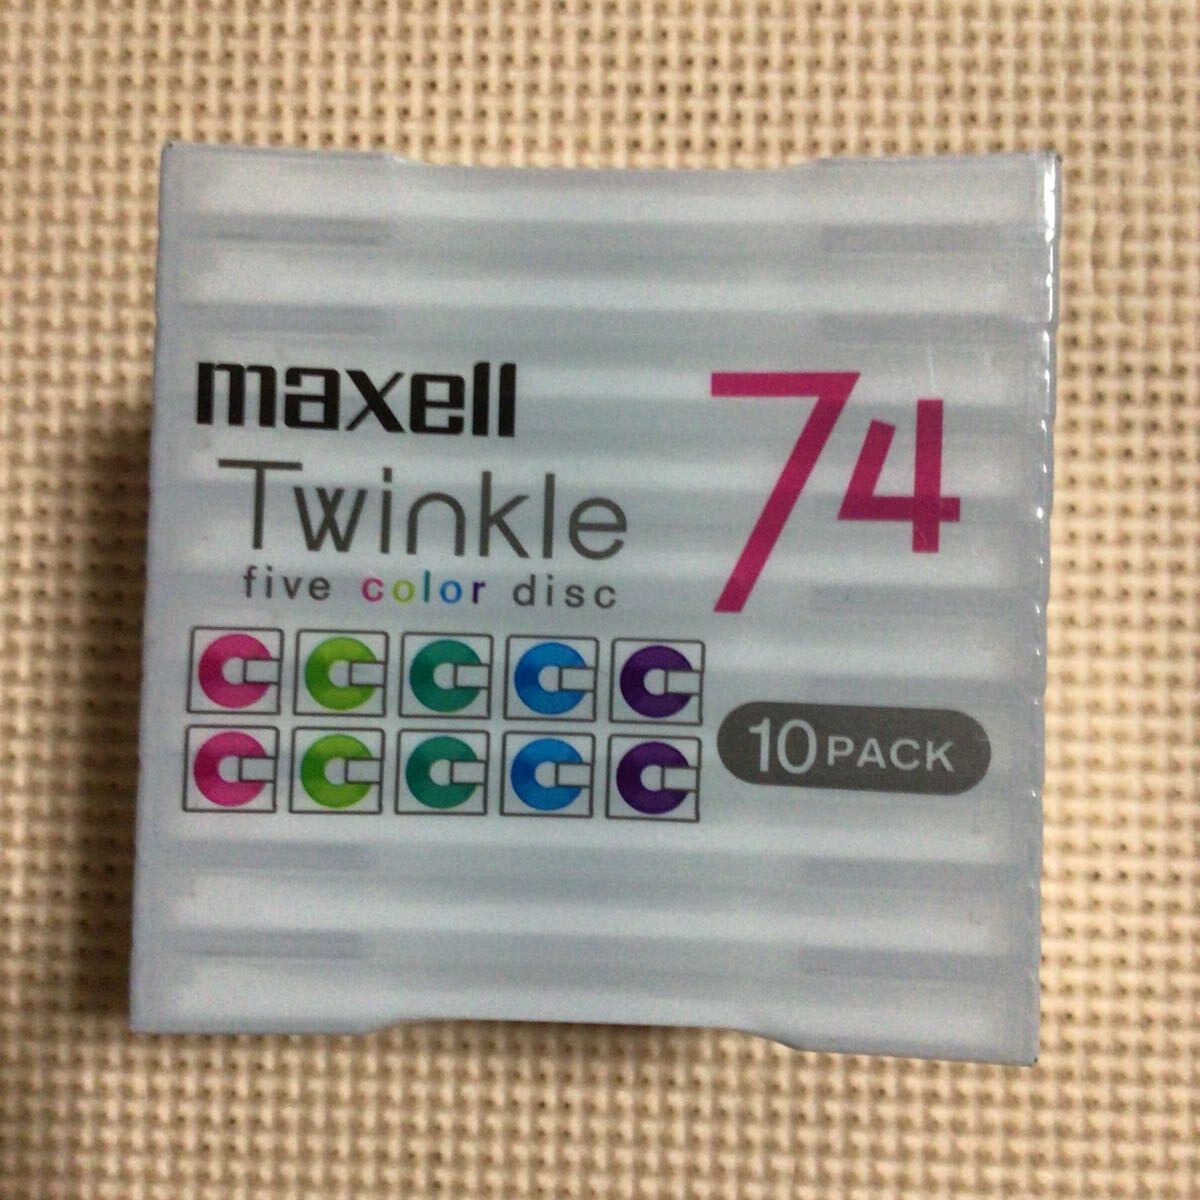 maxell TWINKLE 74 FIVE COLOR 10パック MD【mini disc】【未開封新品】★の画像2